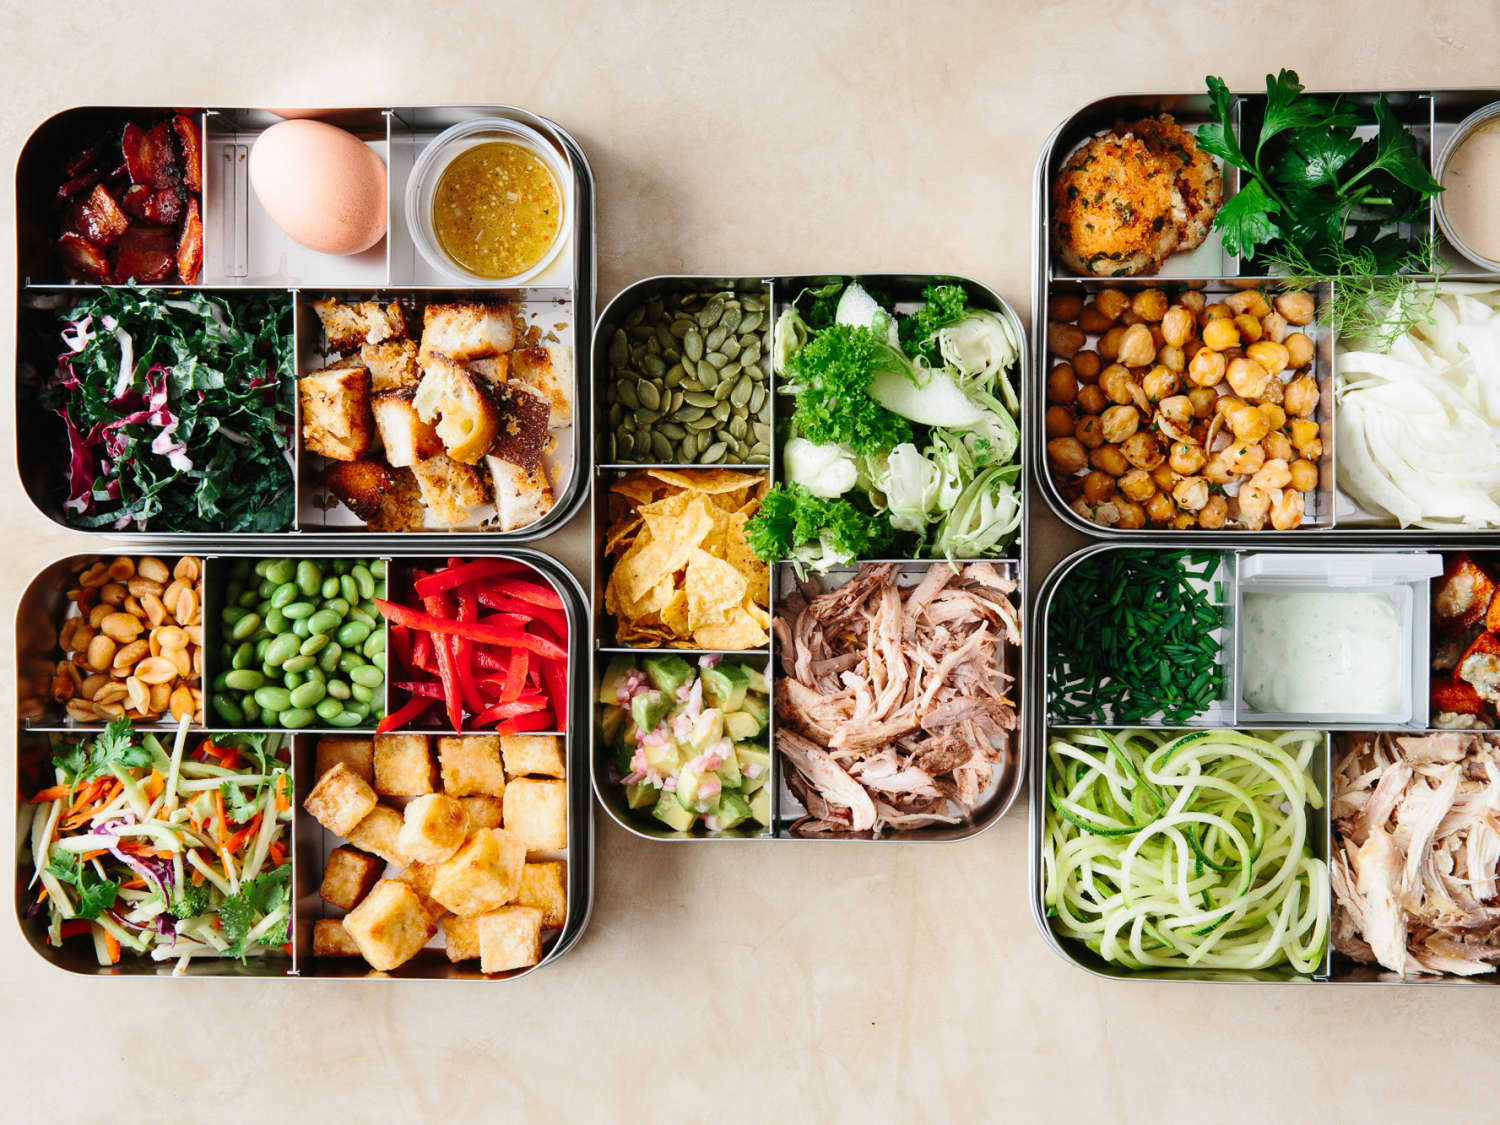 How To Pack Lunch For Work? 12 Tips for Packing Food